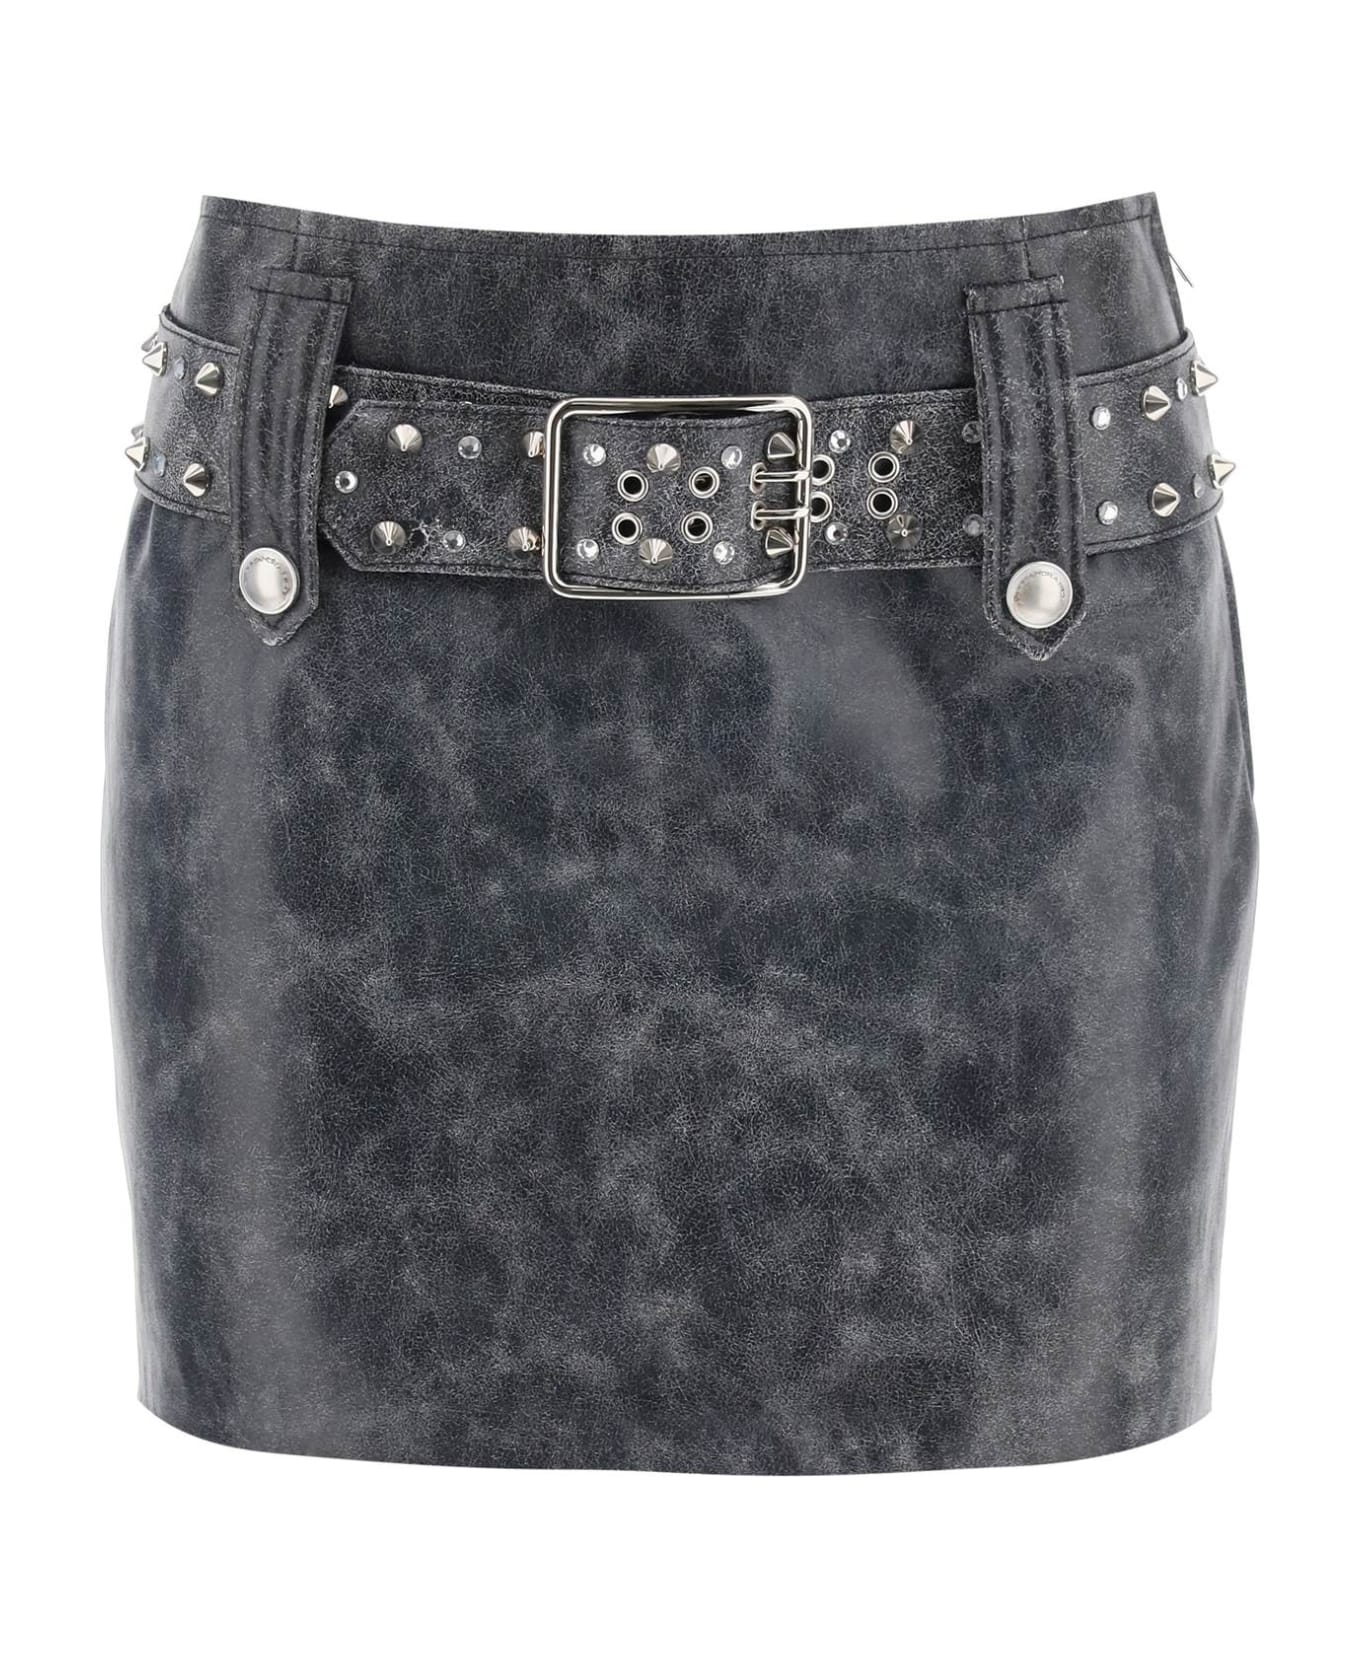 Alessandra Rich Leather Mini Skirt With Belt And Appliques - DARK GREY (Grey) スカート